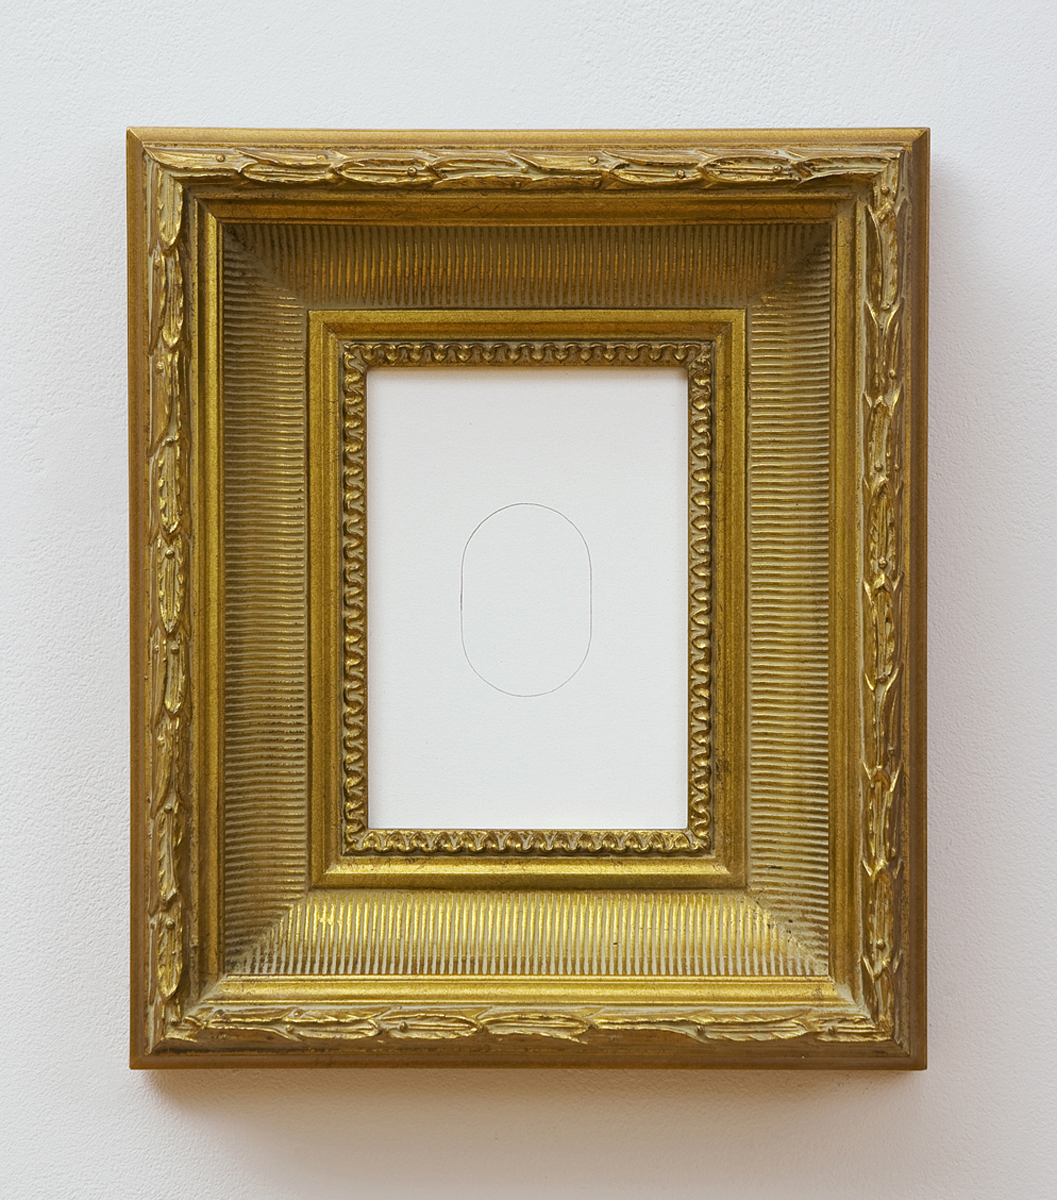 A minimalist pencil line oval on a white background in an ornate gold frame.